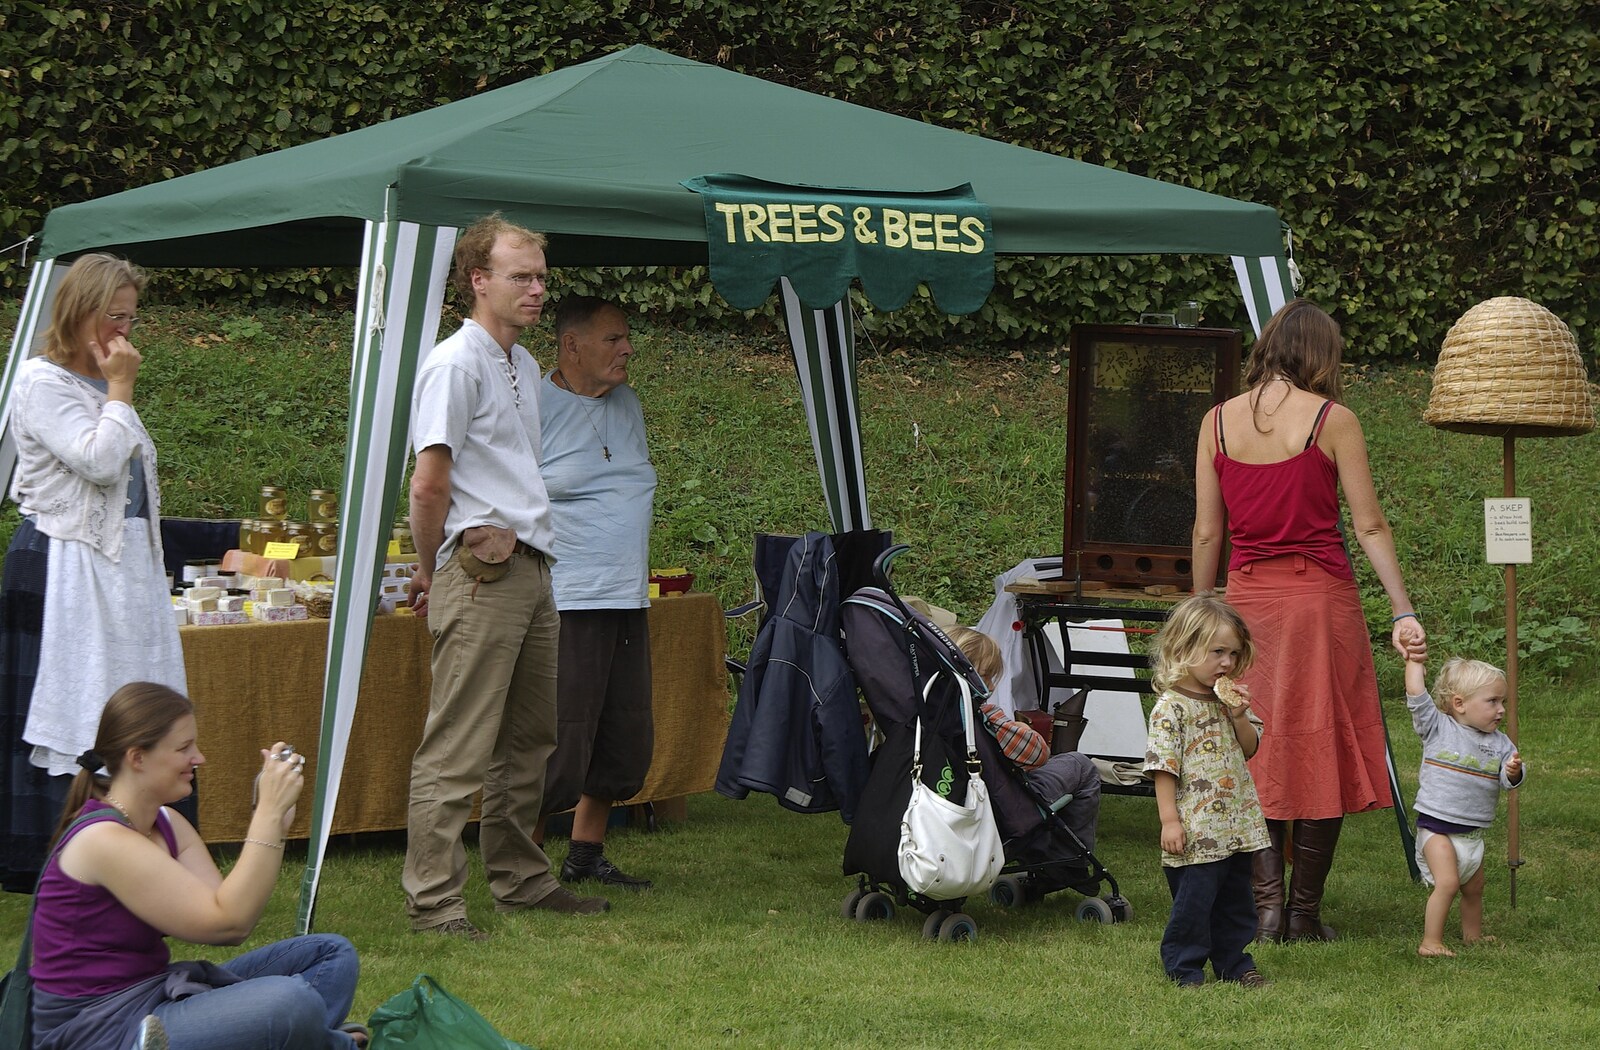 There's an active bee hive at the bee gazebo from Stourbridge Fair at the Leper Chapel, Cambridge - 8th September 2007